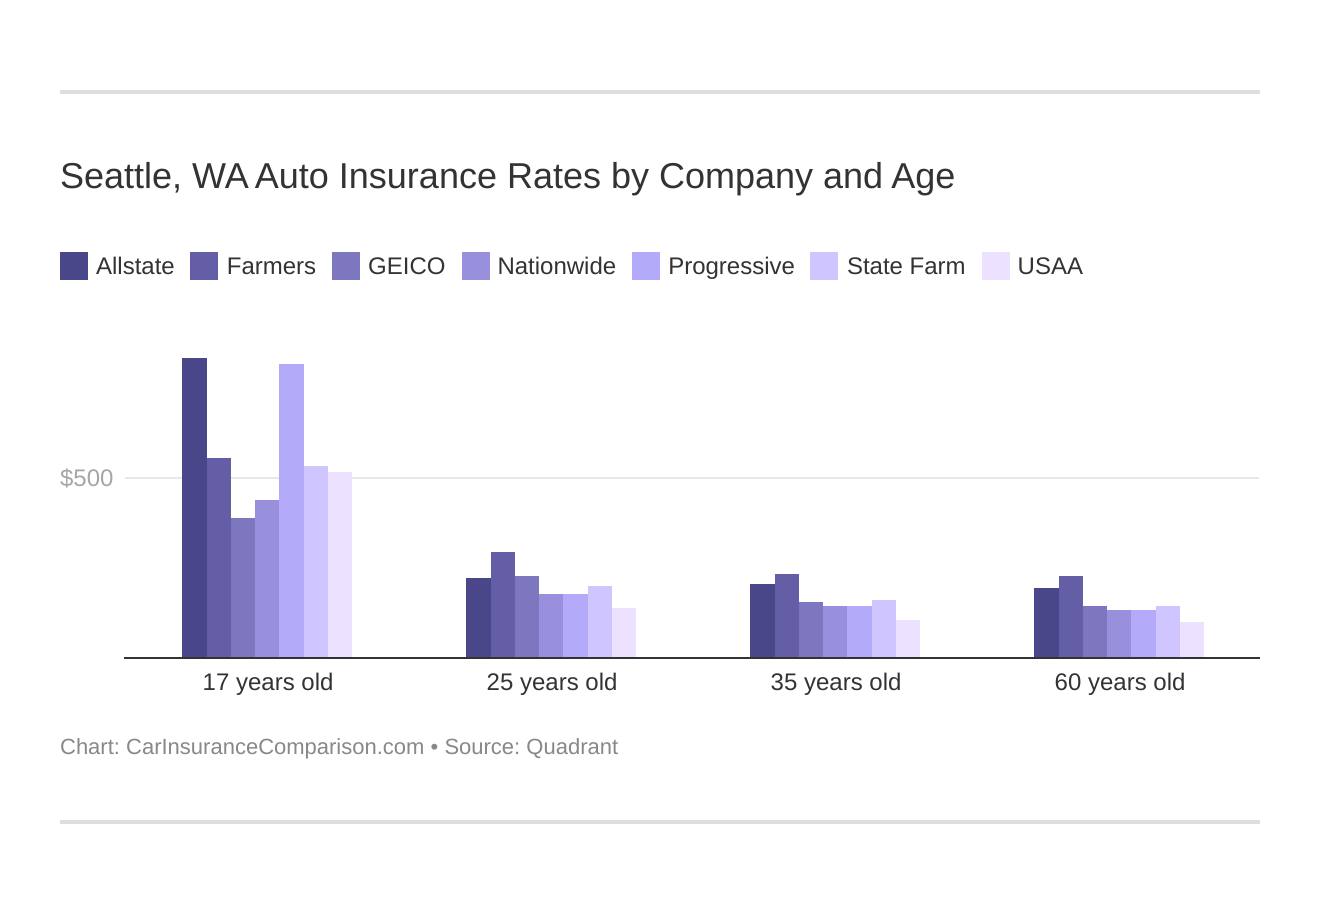 Seattle, WA Auto Insurance Rates by Company and Age